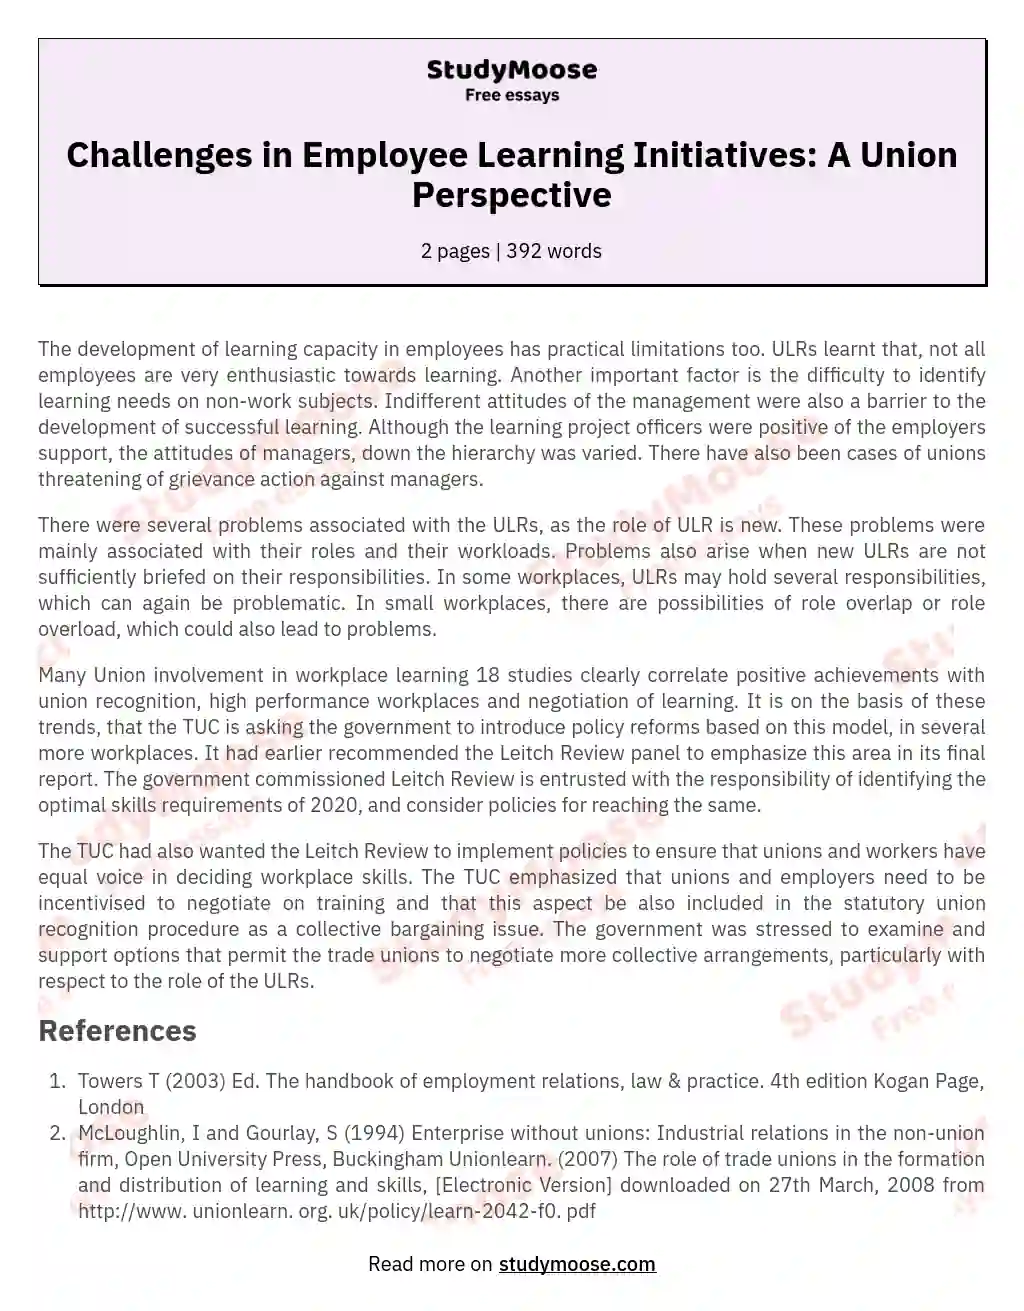 Challenges in Employee Learning Initiatives: A Union Perspective essay